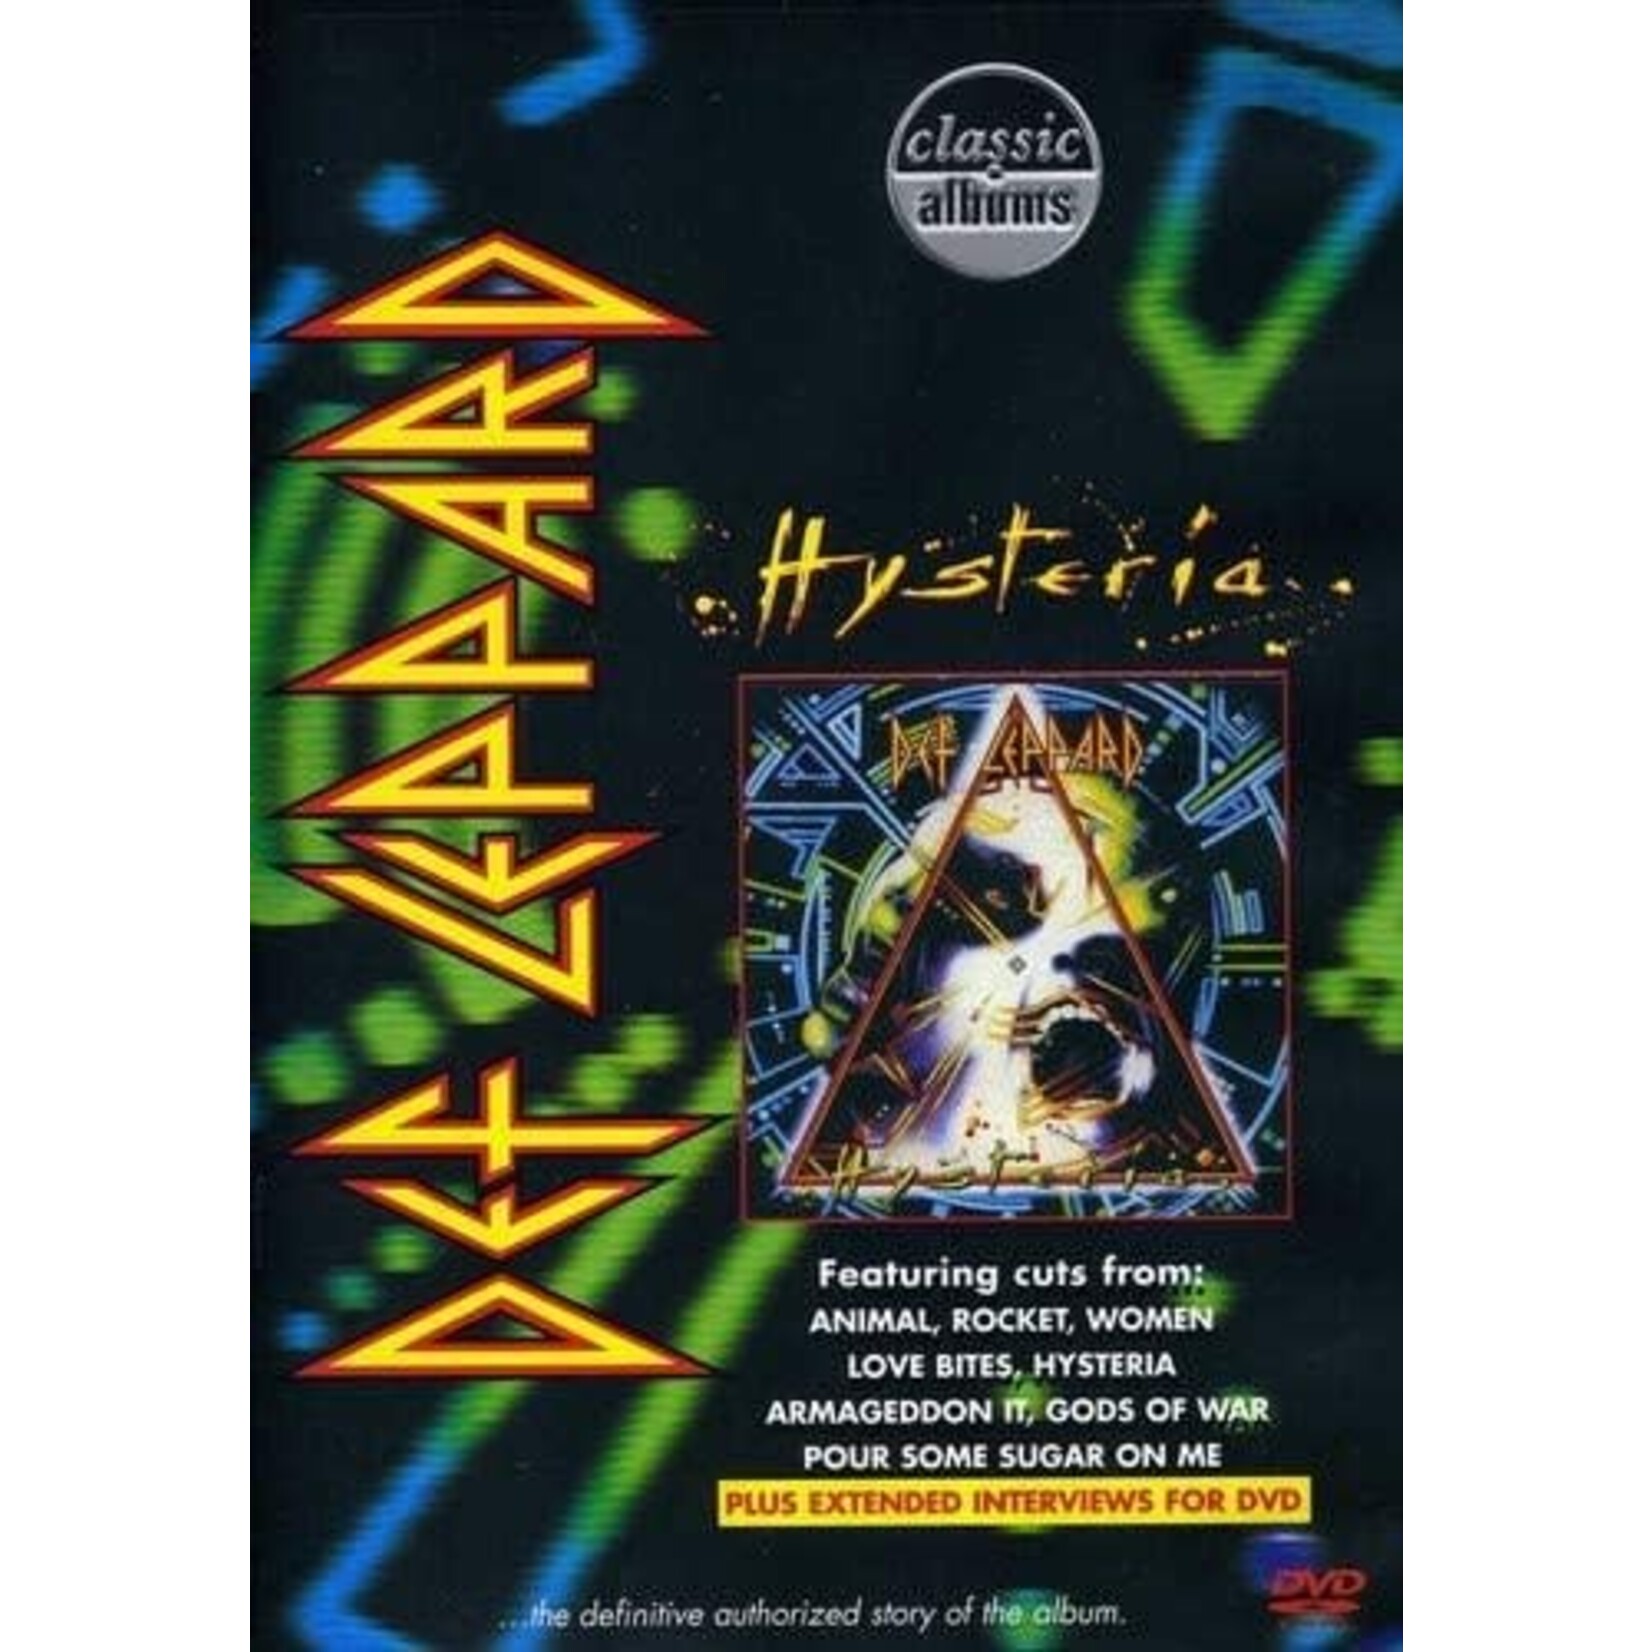 Def Leppard - Classic Albums: Hysteria [USED DVD]